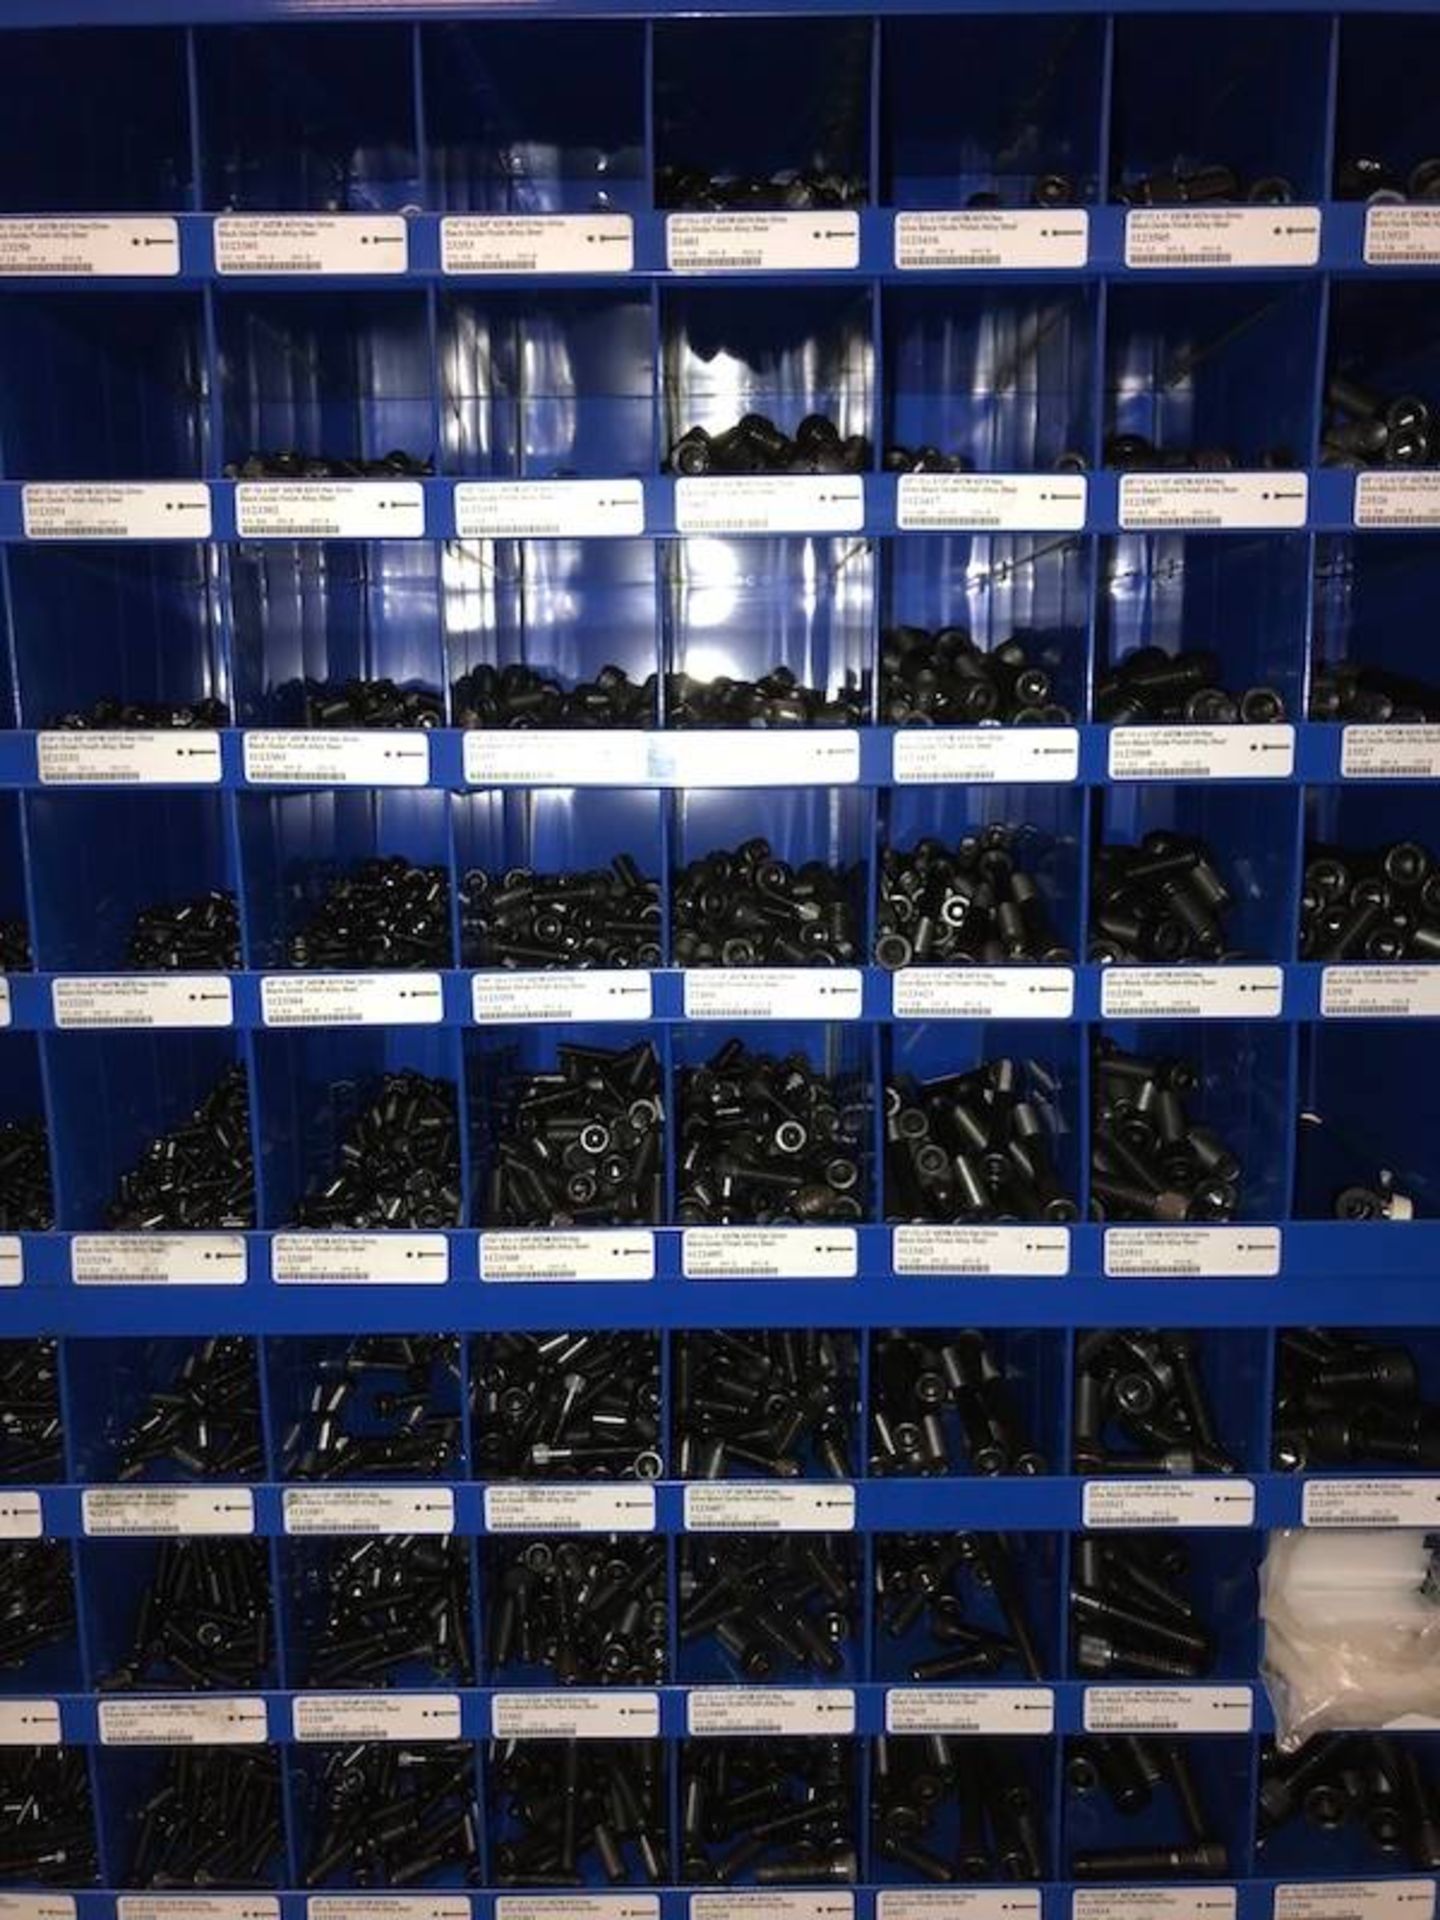 Contents of Fastenal Parts Bins - Image 63 of 70